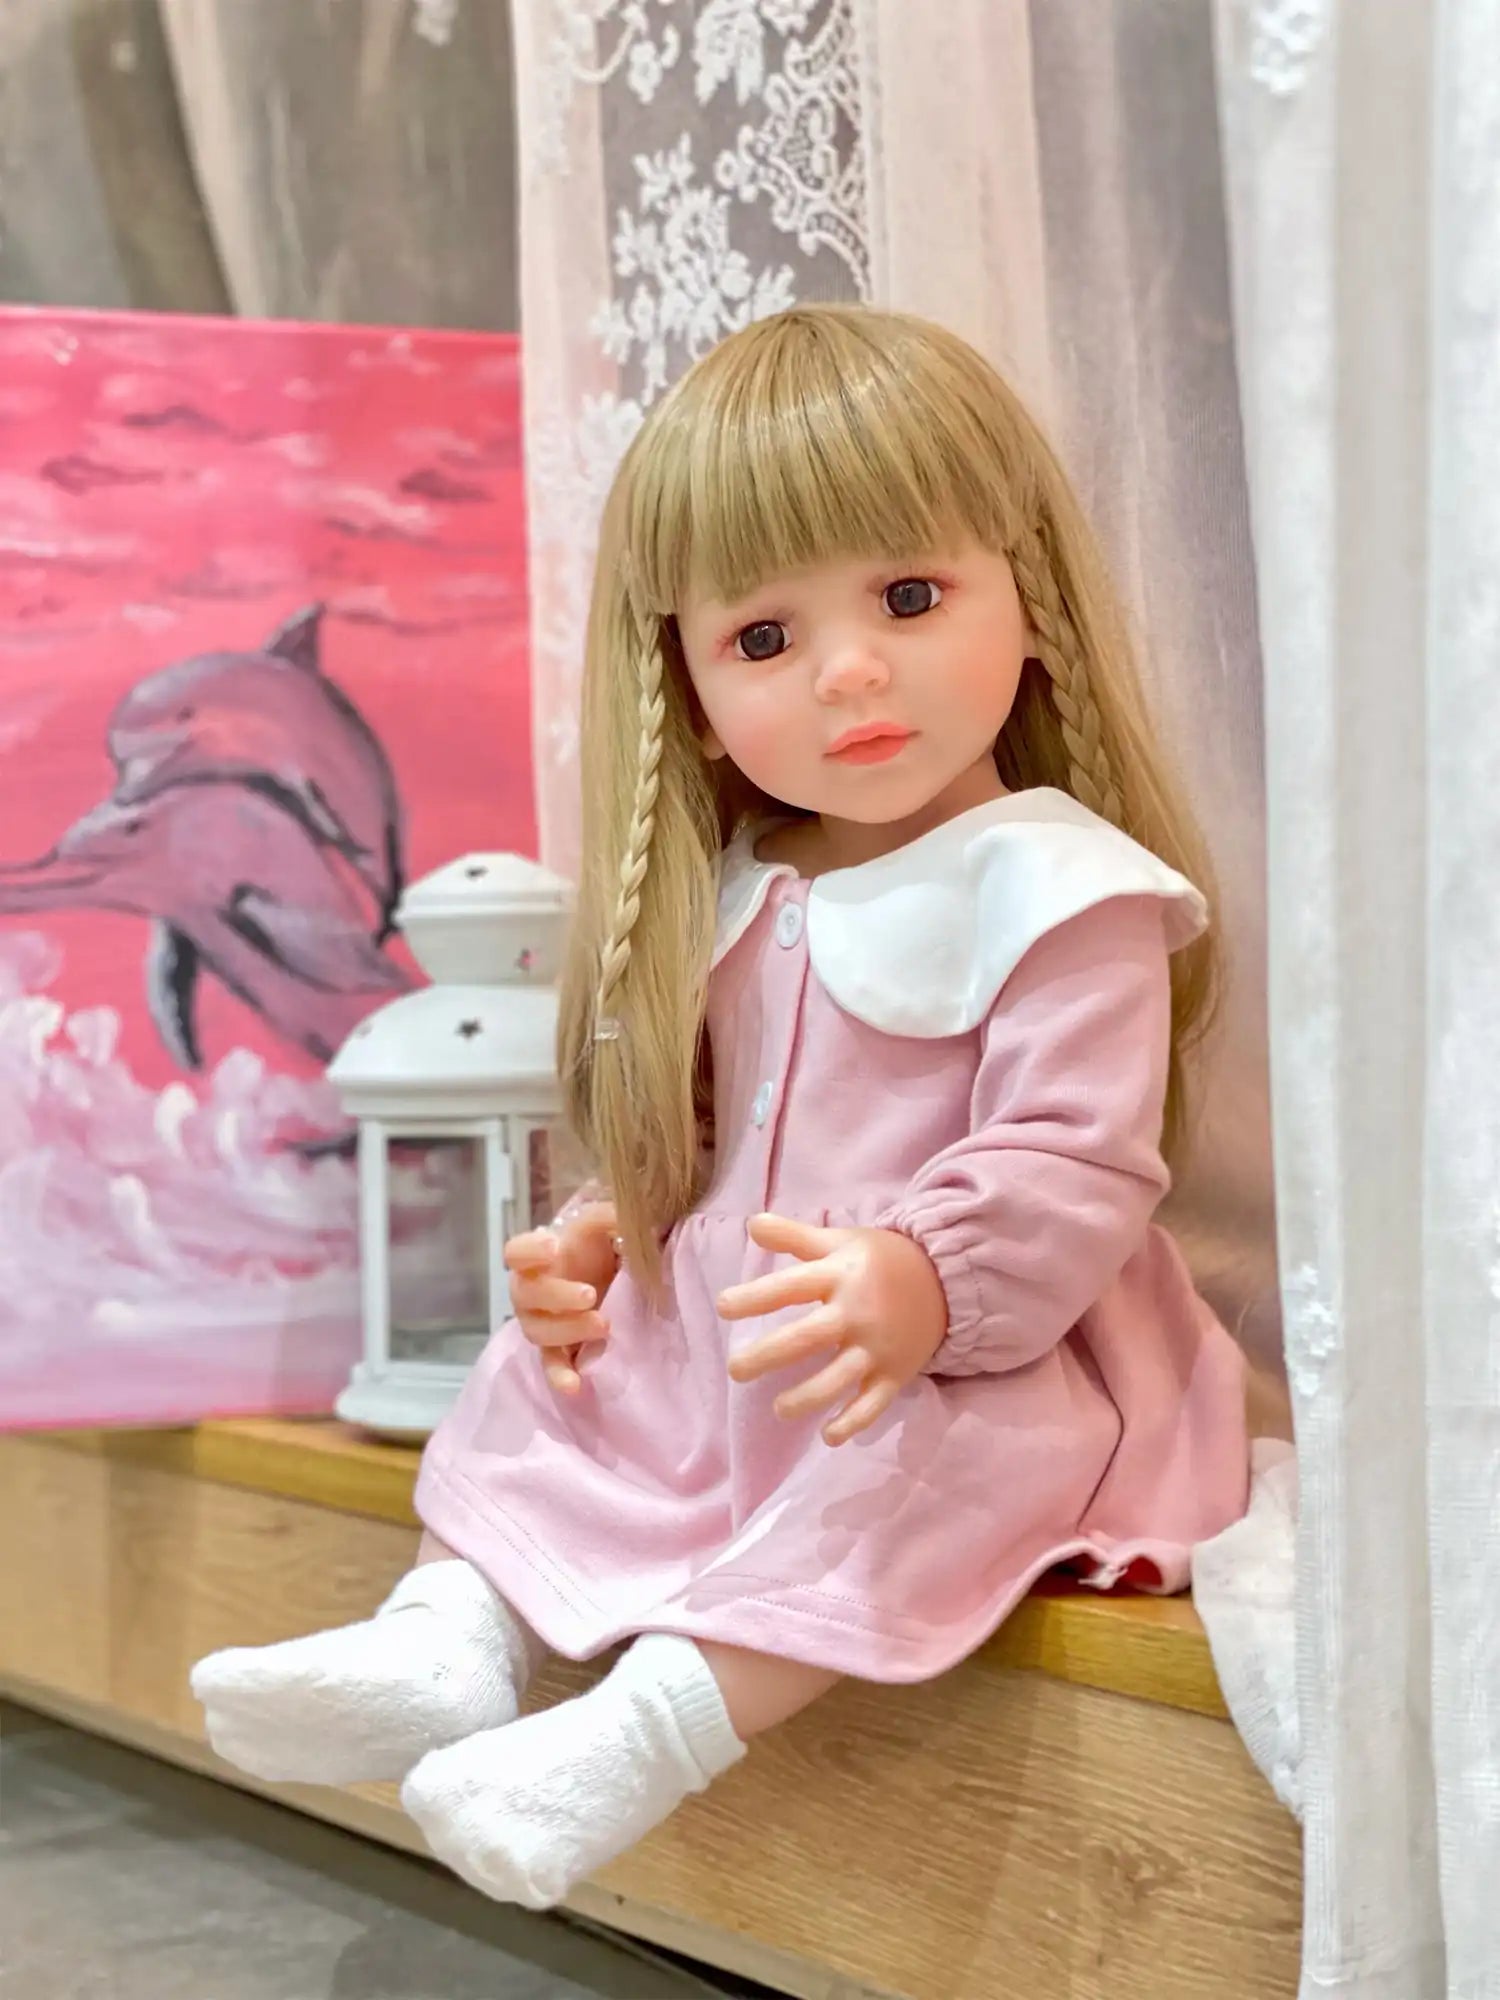 Doll with a contemplative look in a pastel pink dress, seated indoors with a dolphin painting in the background.